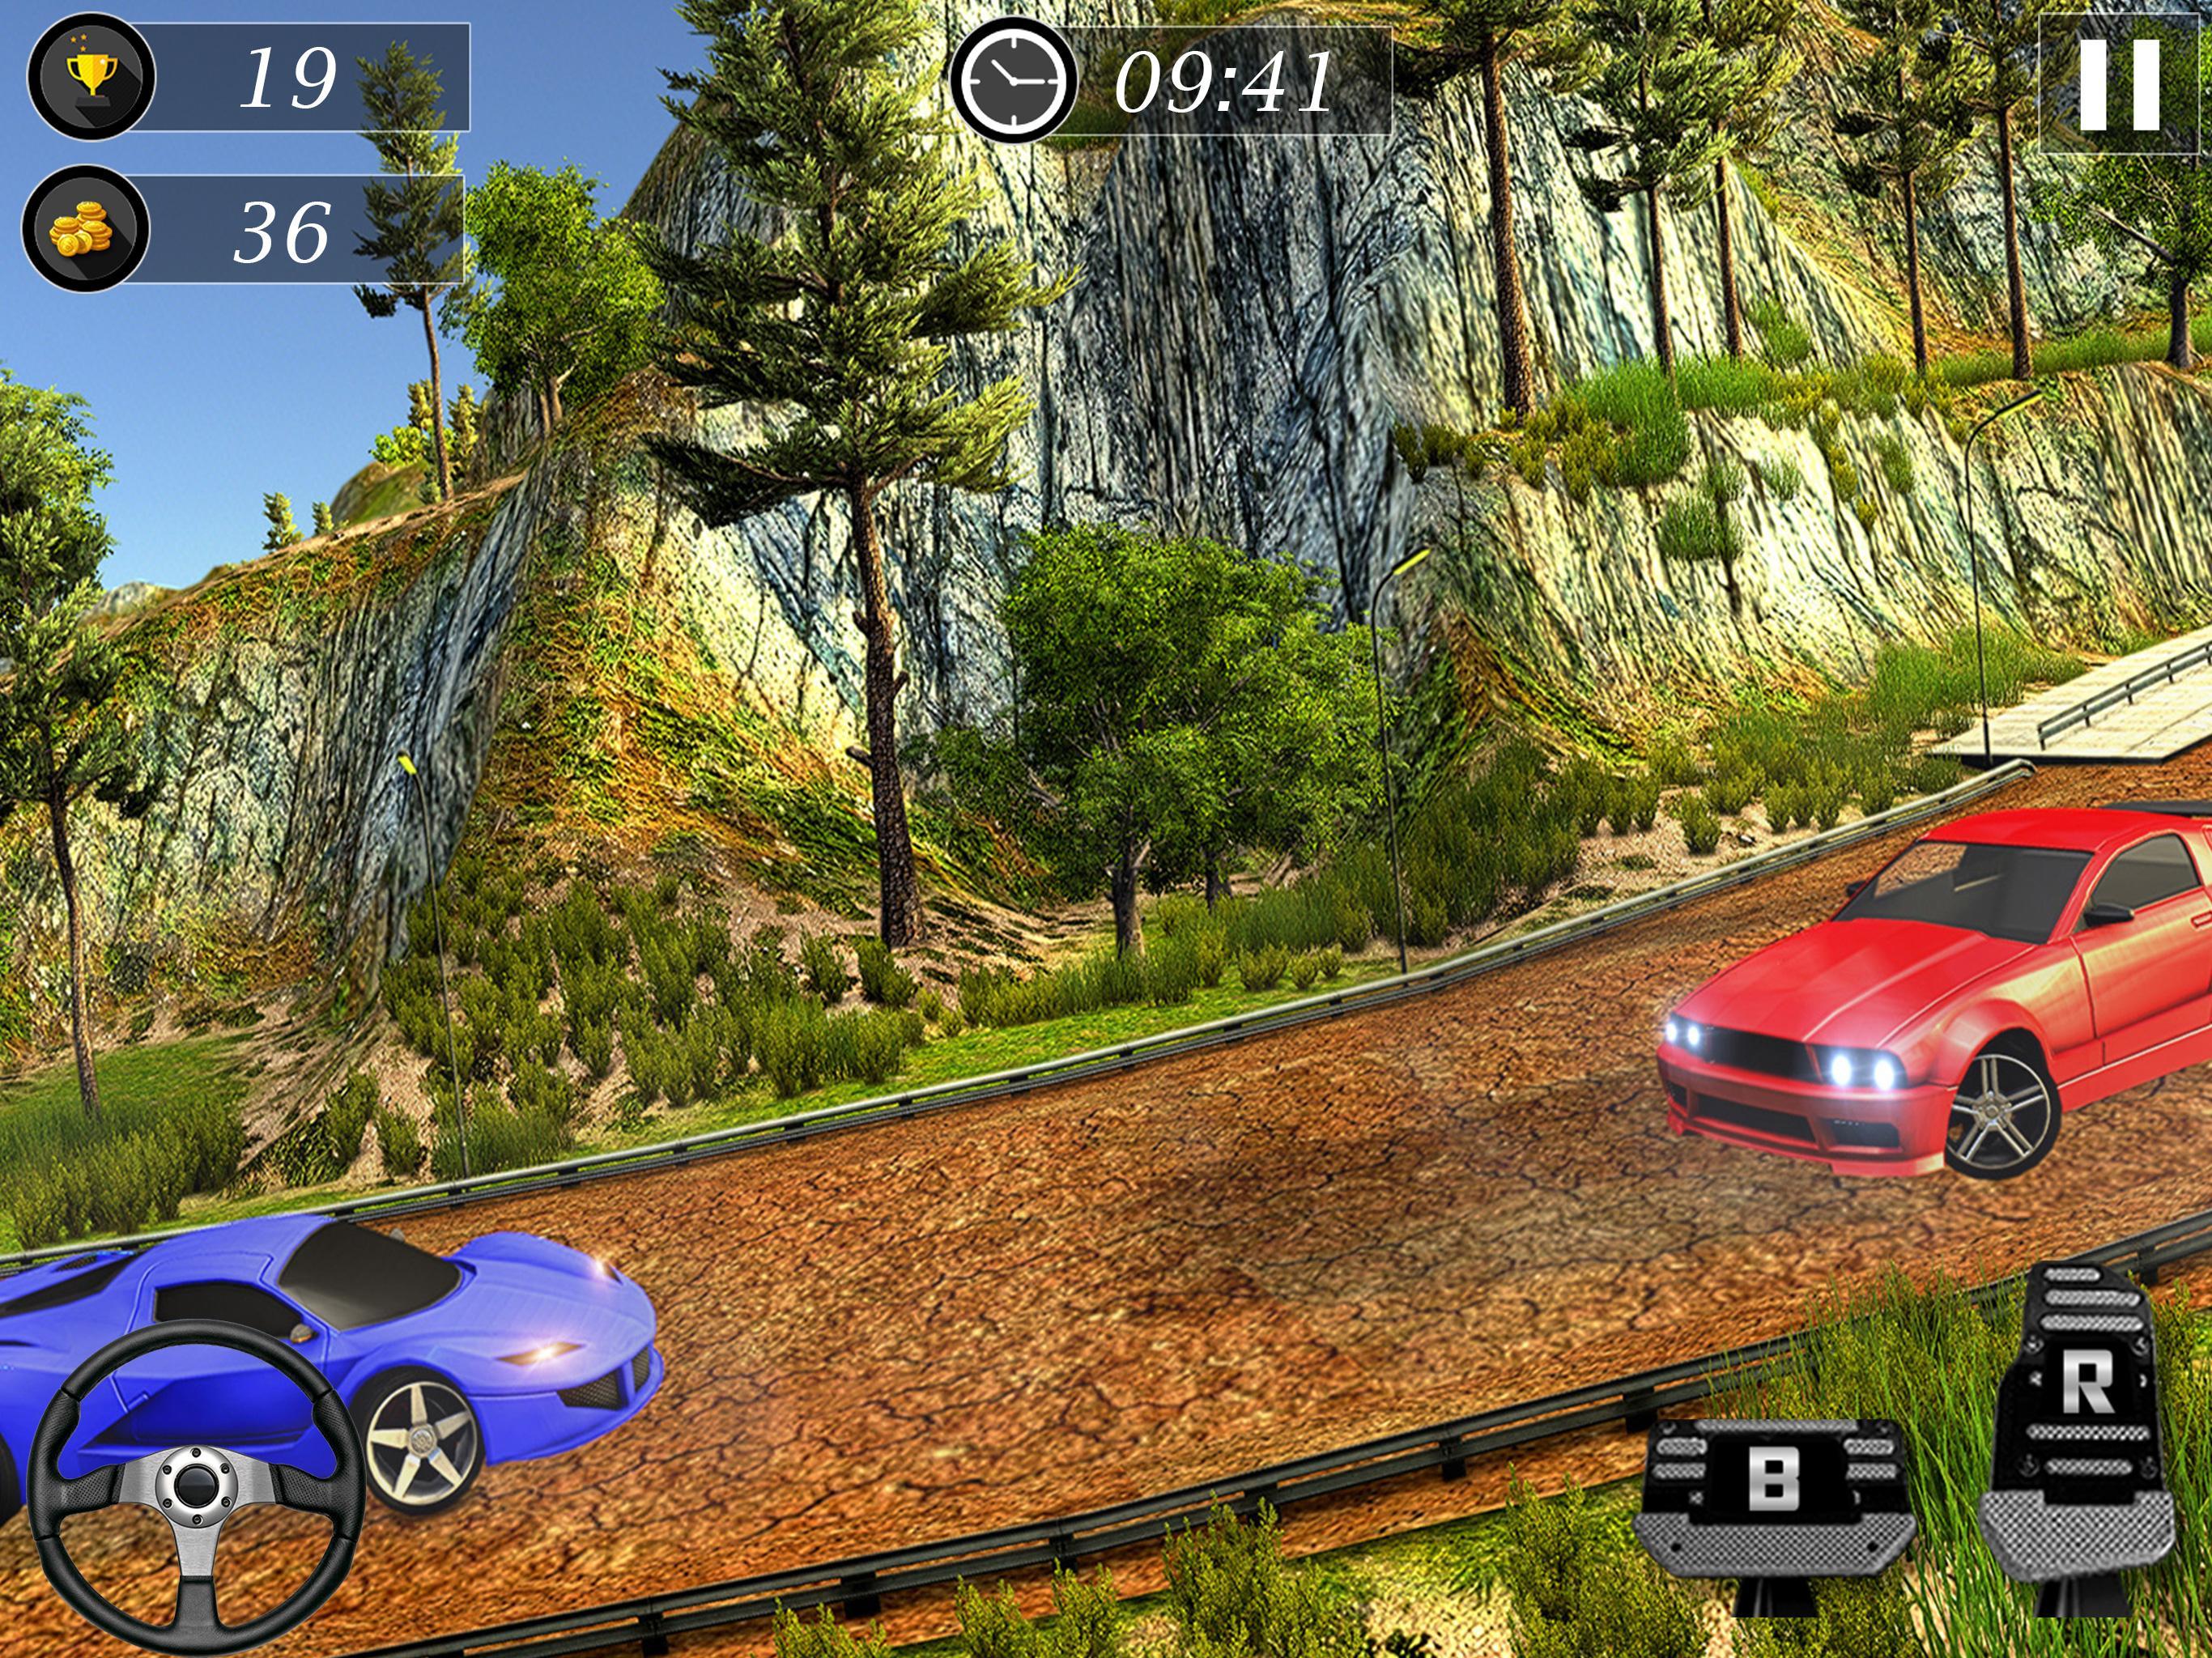 Взломка offroad car driving game. Offroad car Driving. Offroad car Driving game. OTR Offroad car Driving game.